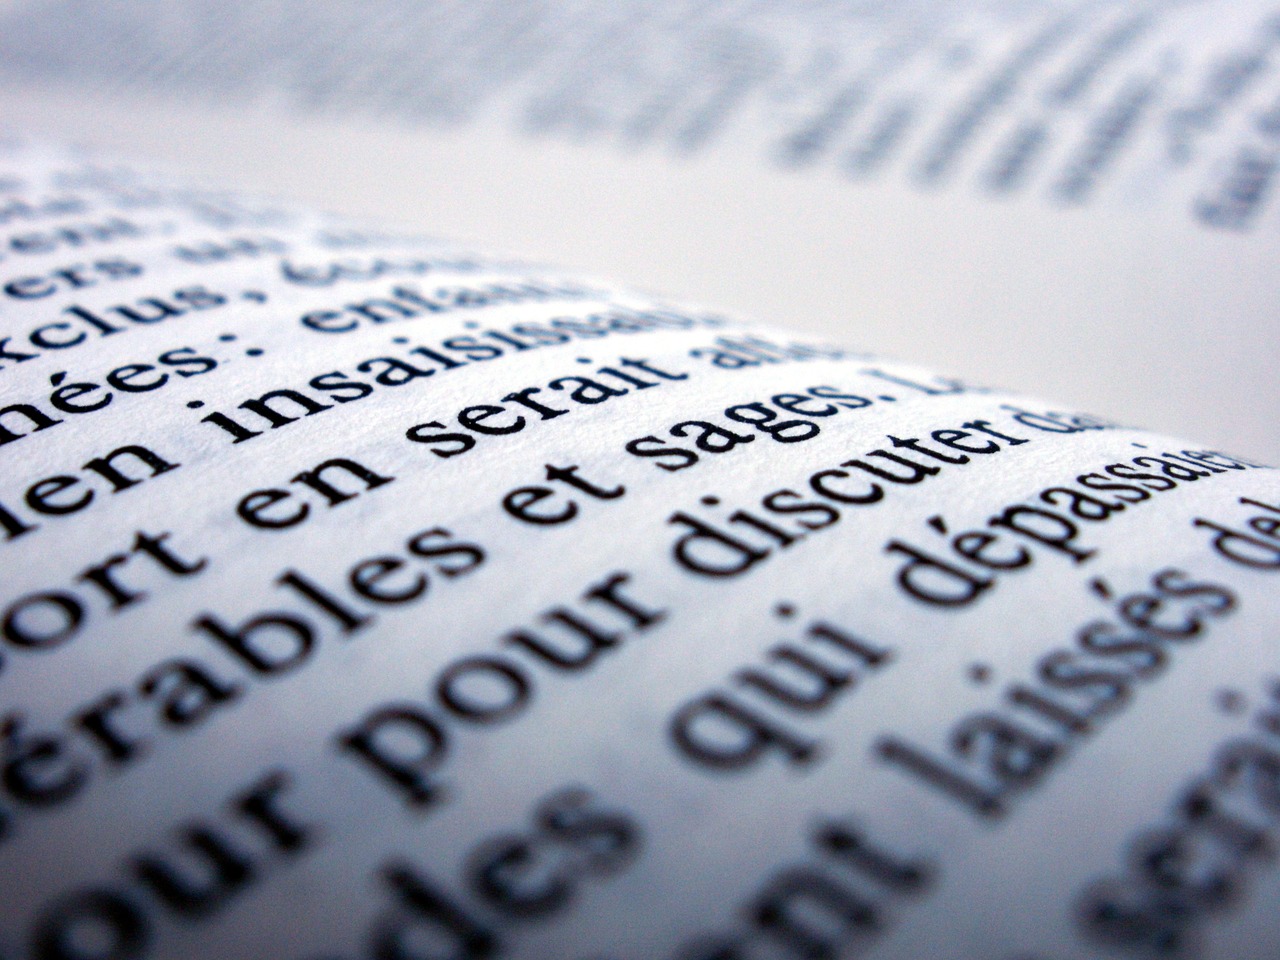 A close-up picture of a book with French script.